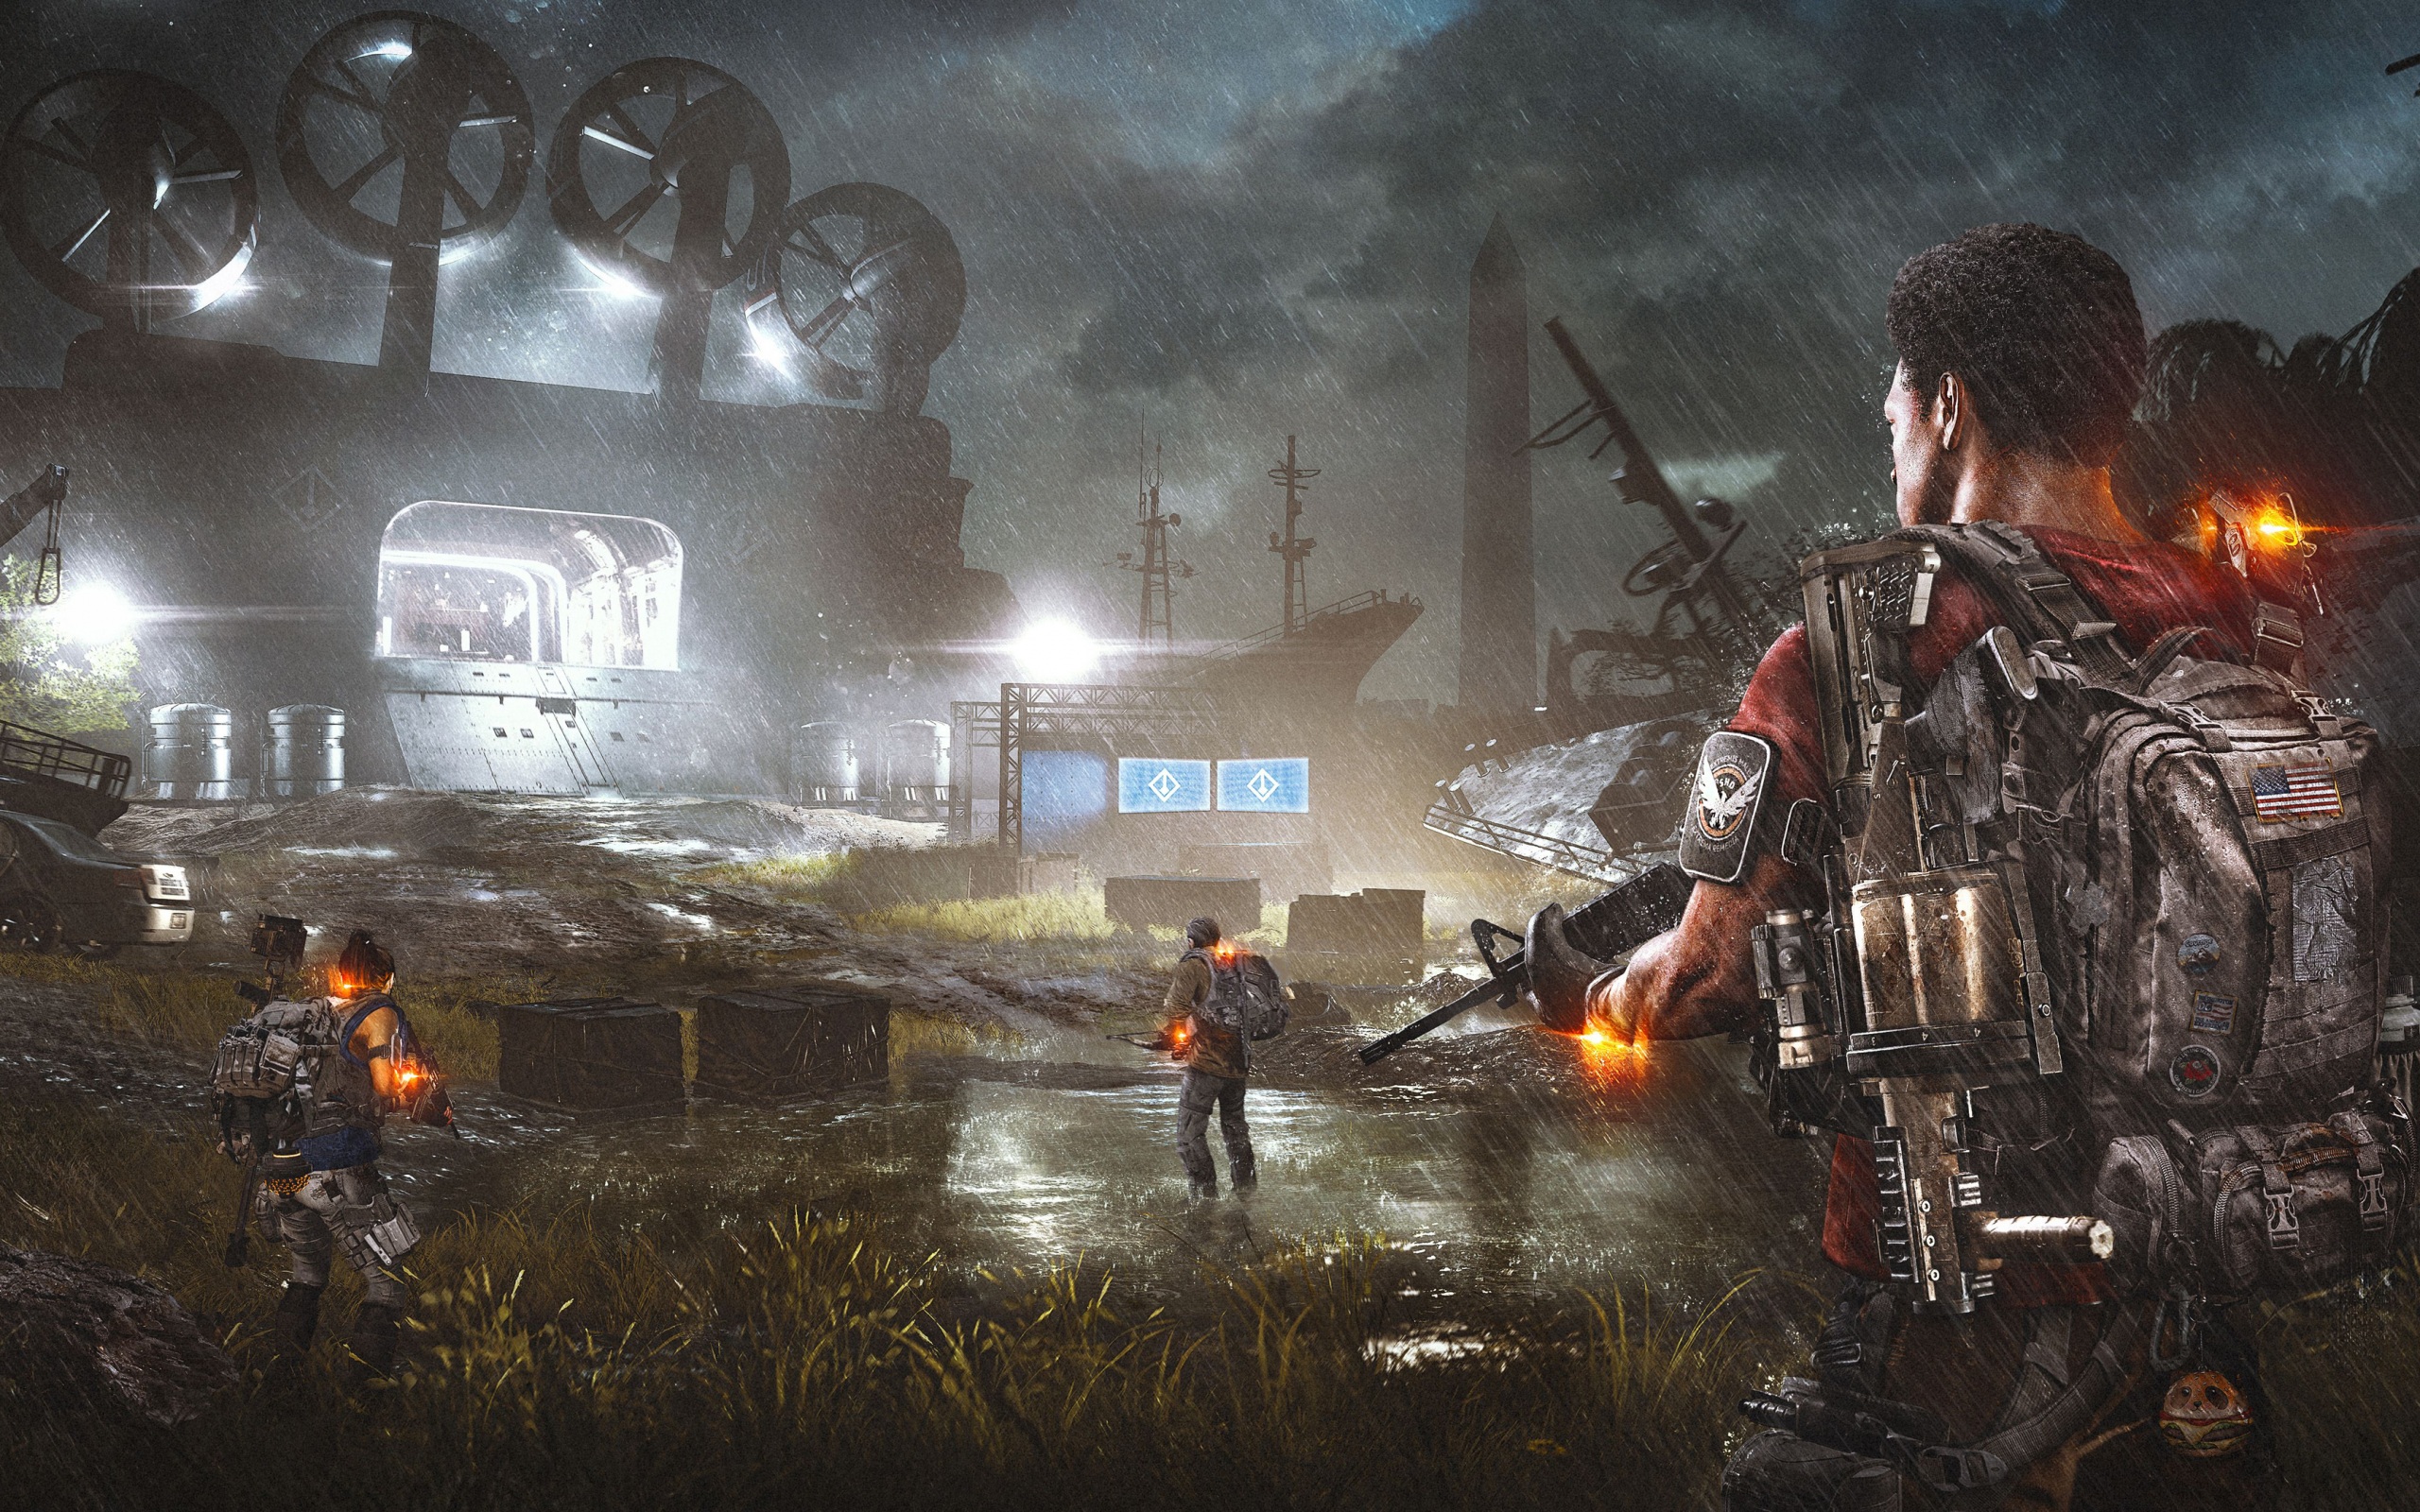 Wallpaper 4k Tom Clancys The Division 2 Invasion 4k 2019 games